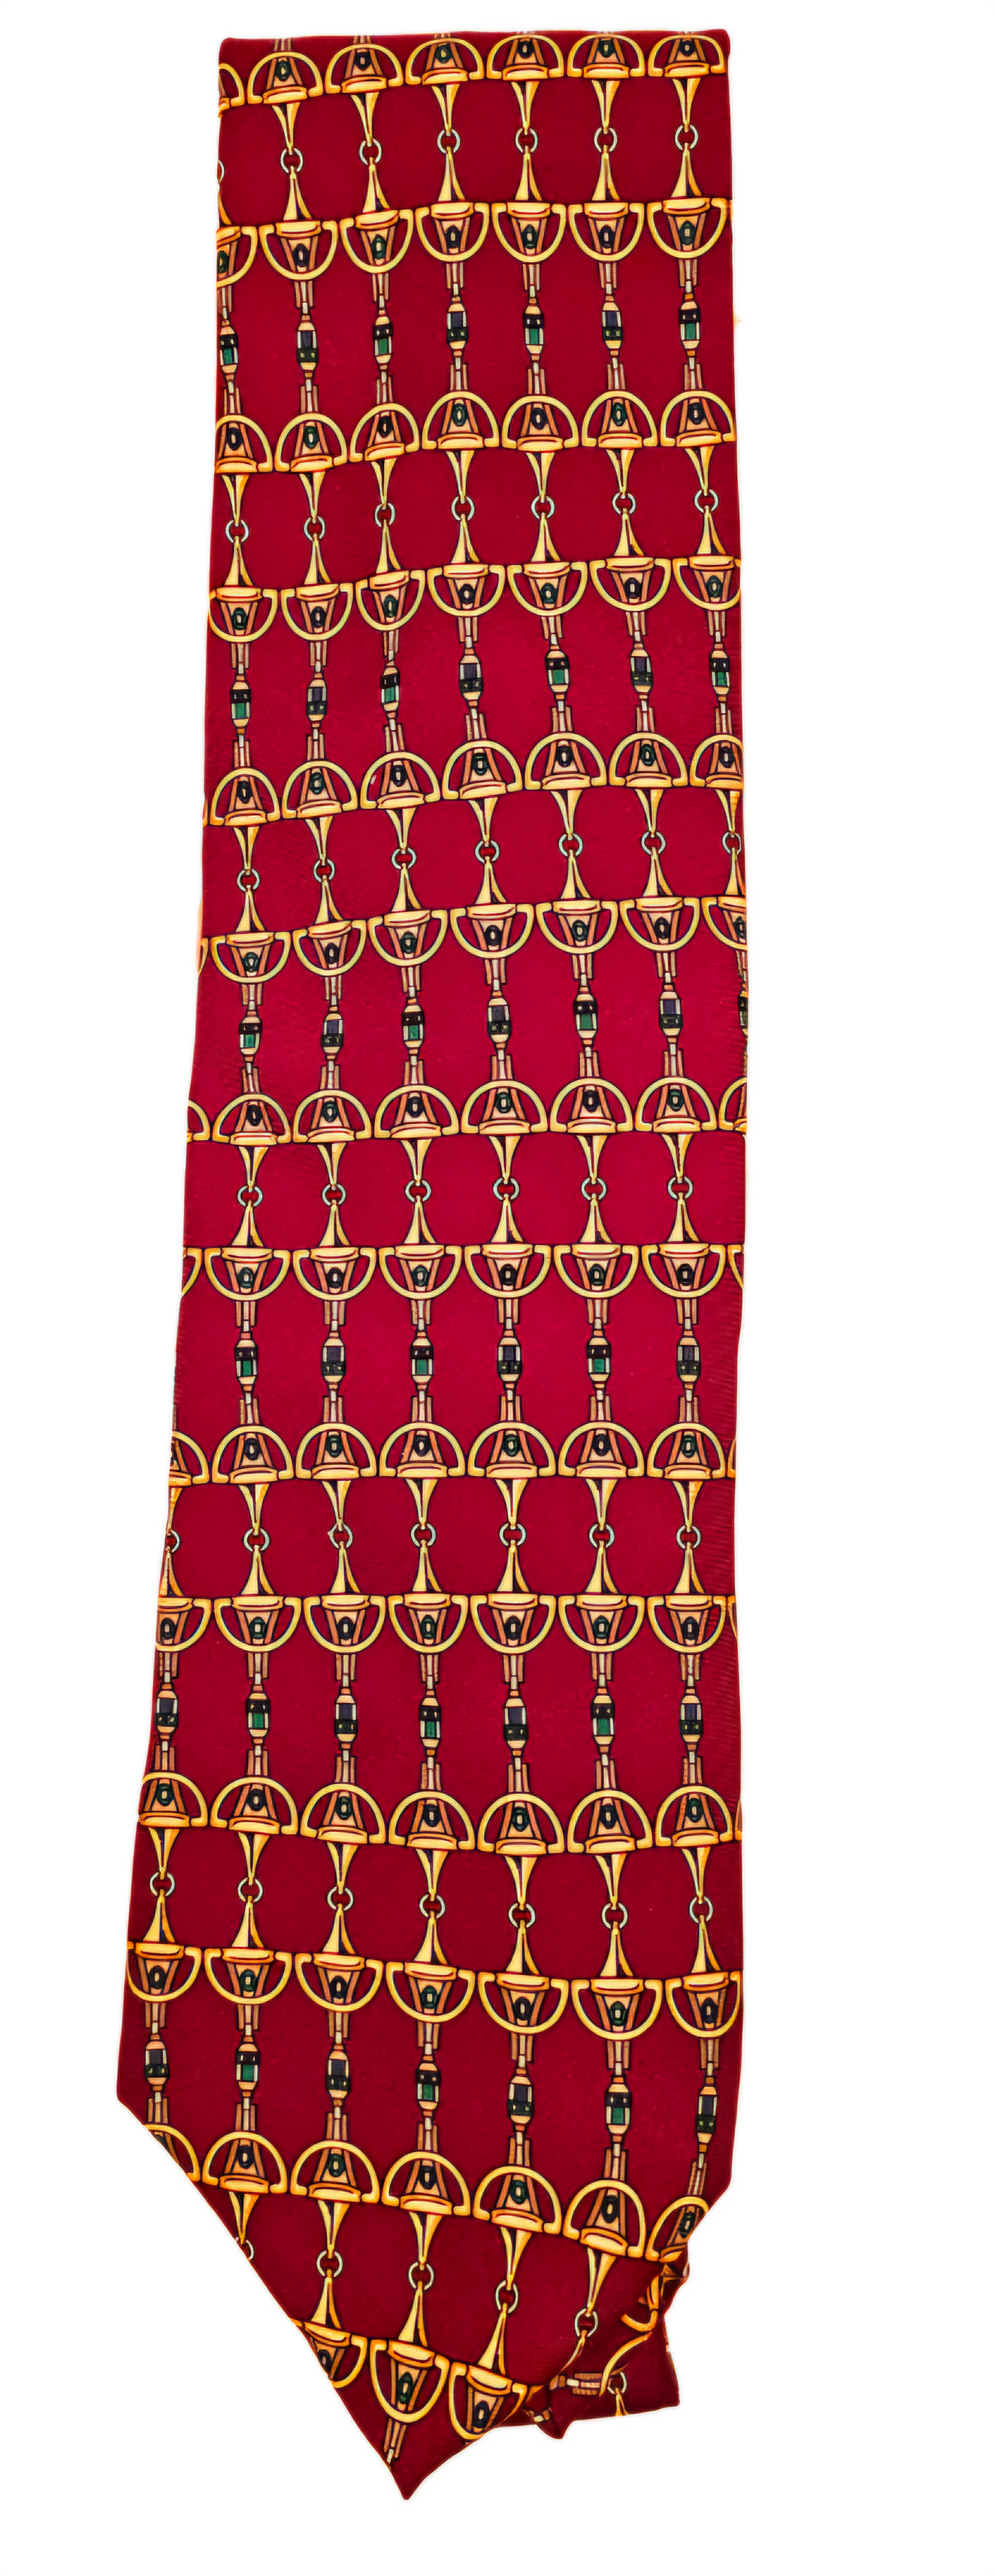 PAOLO by Gucci Red Horsebit Tie